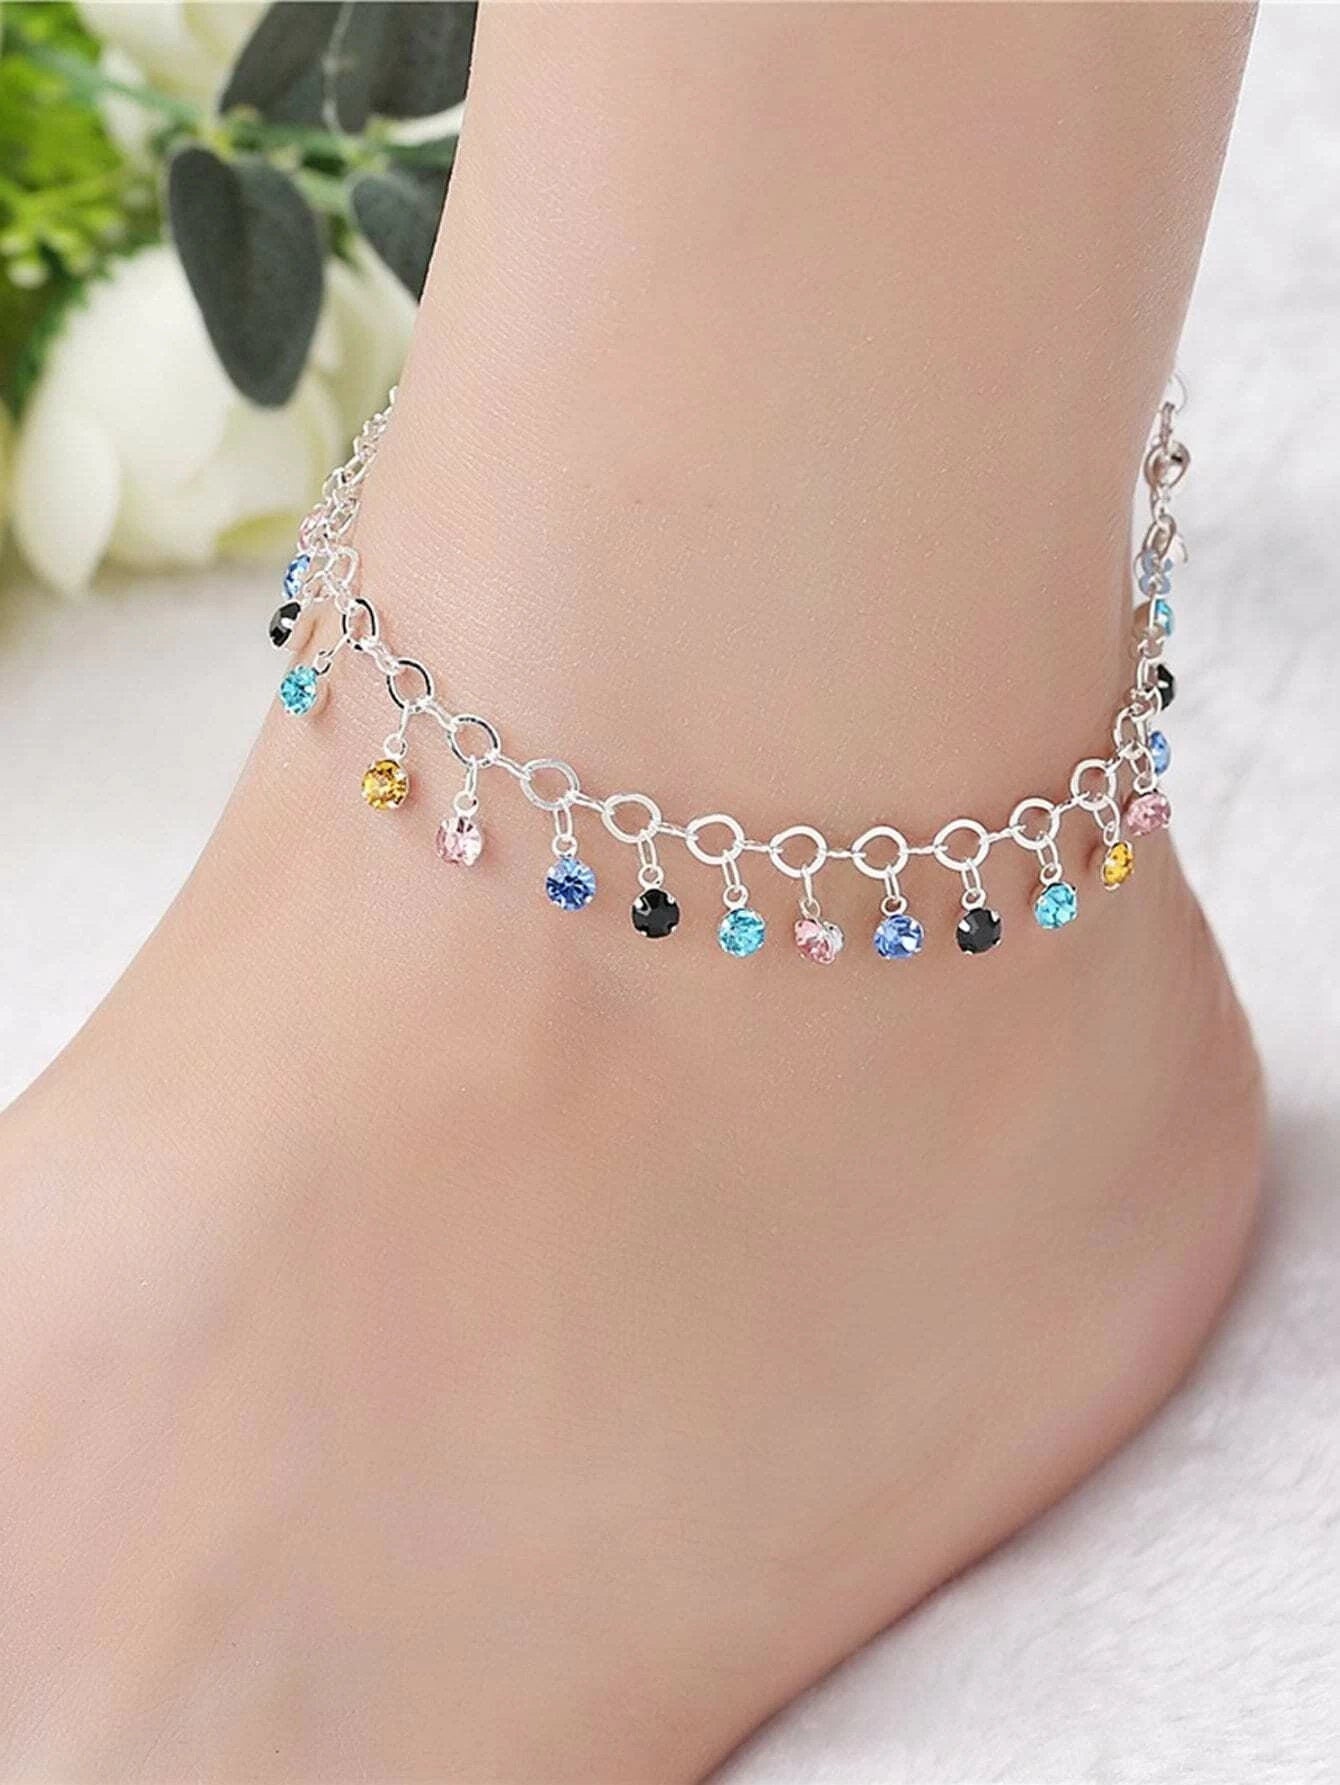 Mixed Rhinestone Charm Chain Anklet Ankle Bracelet